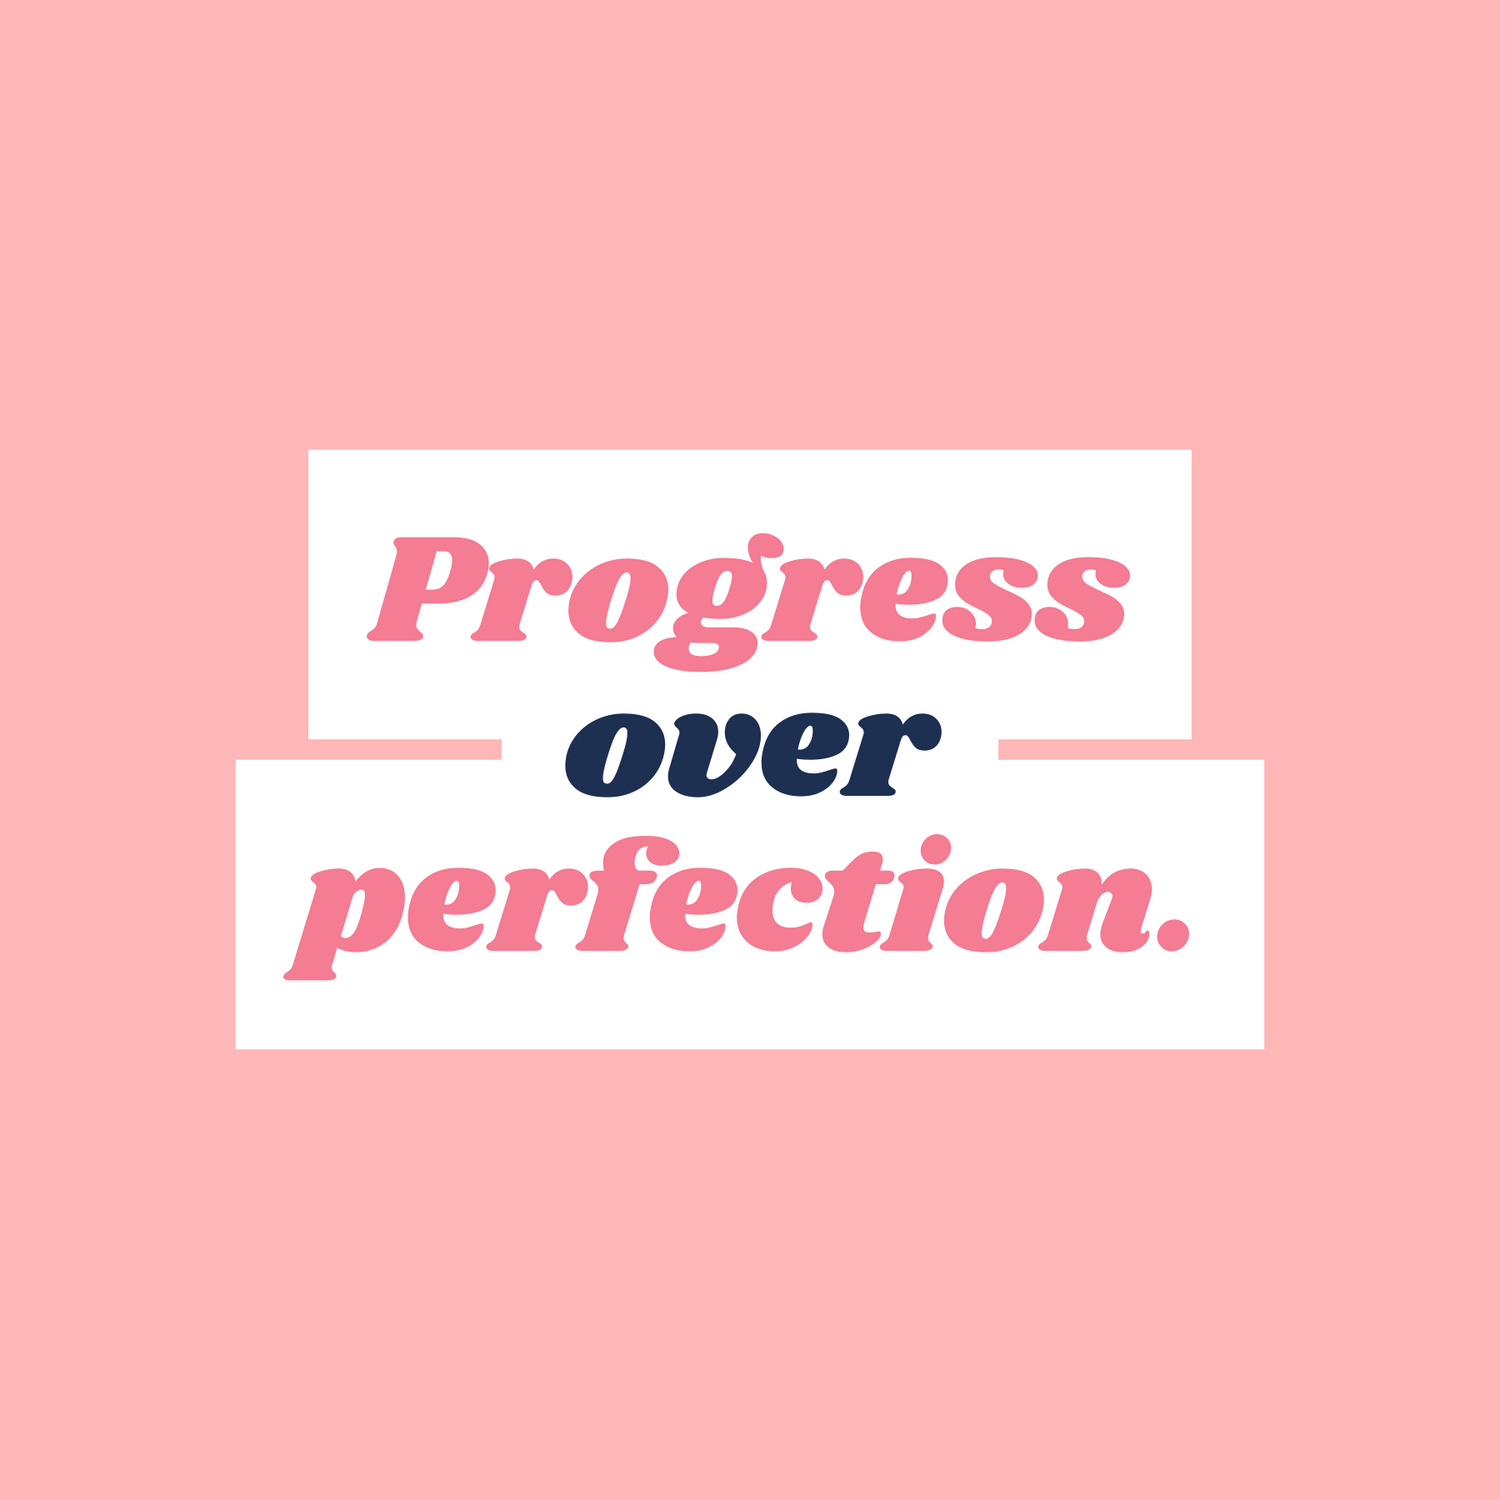 Progress over perfection: Where you start is not where you finish The Fashion Advocate